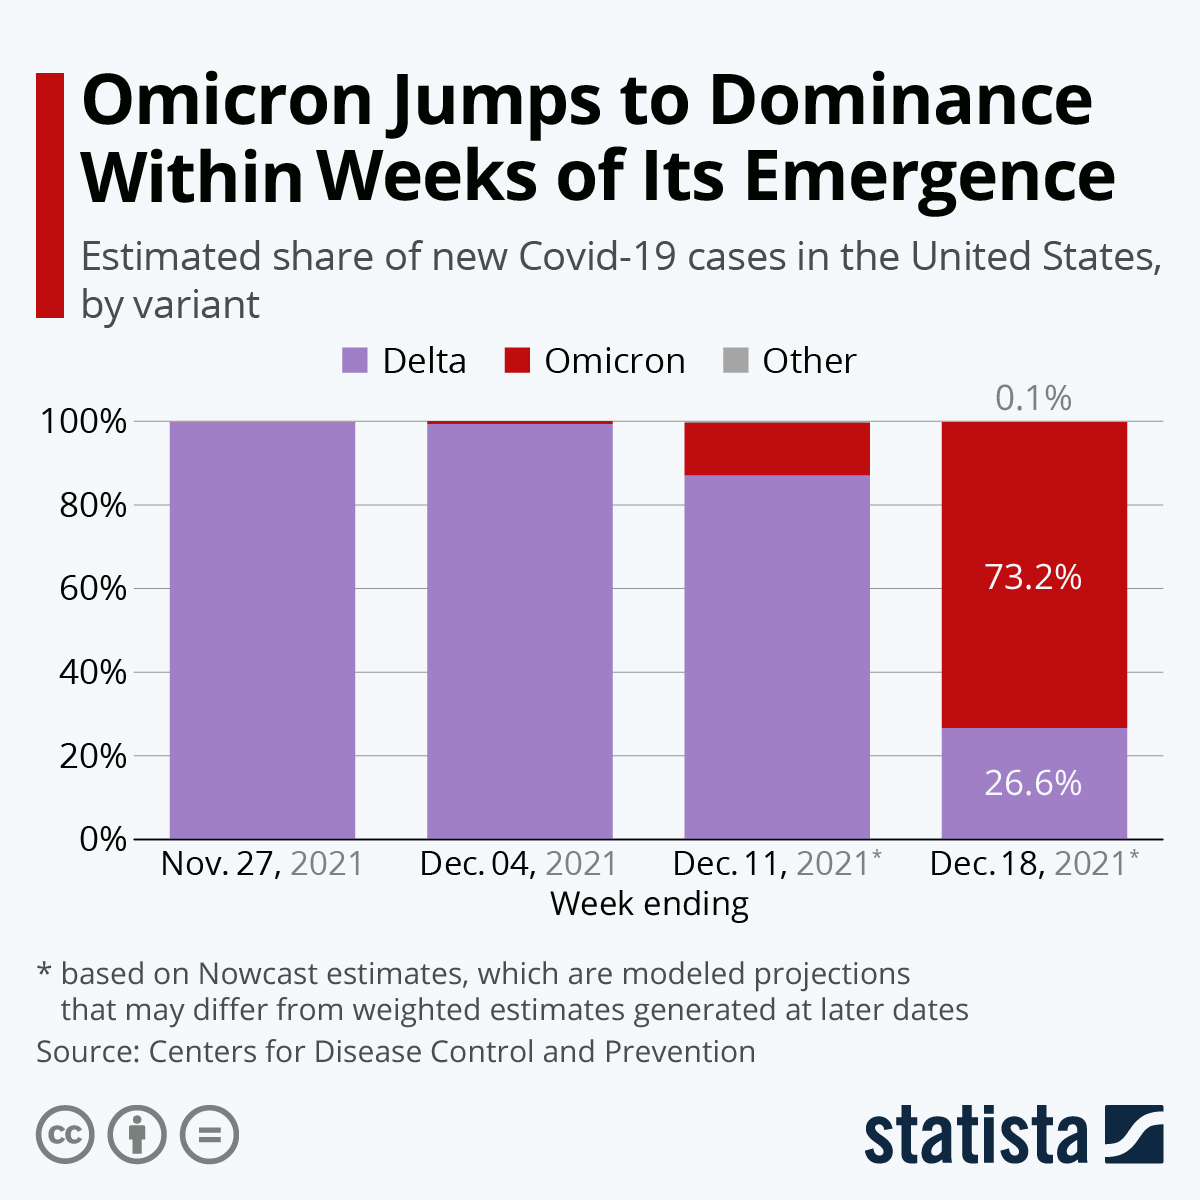 Omicron Jumps to Dominance Within Weeks of Its Emergence